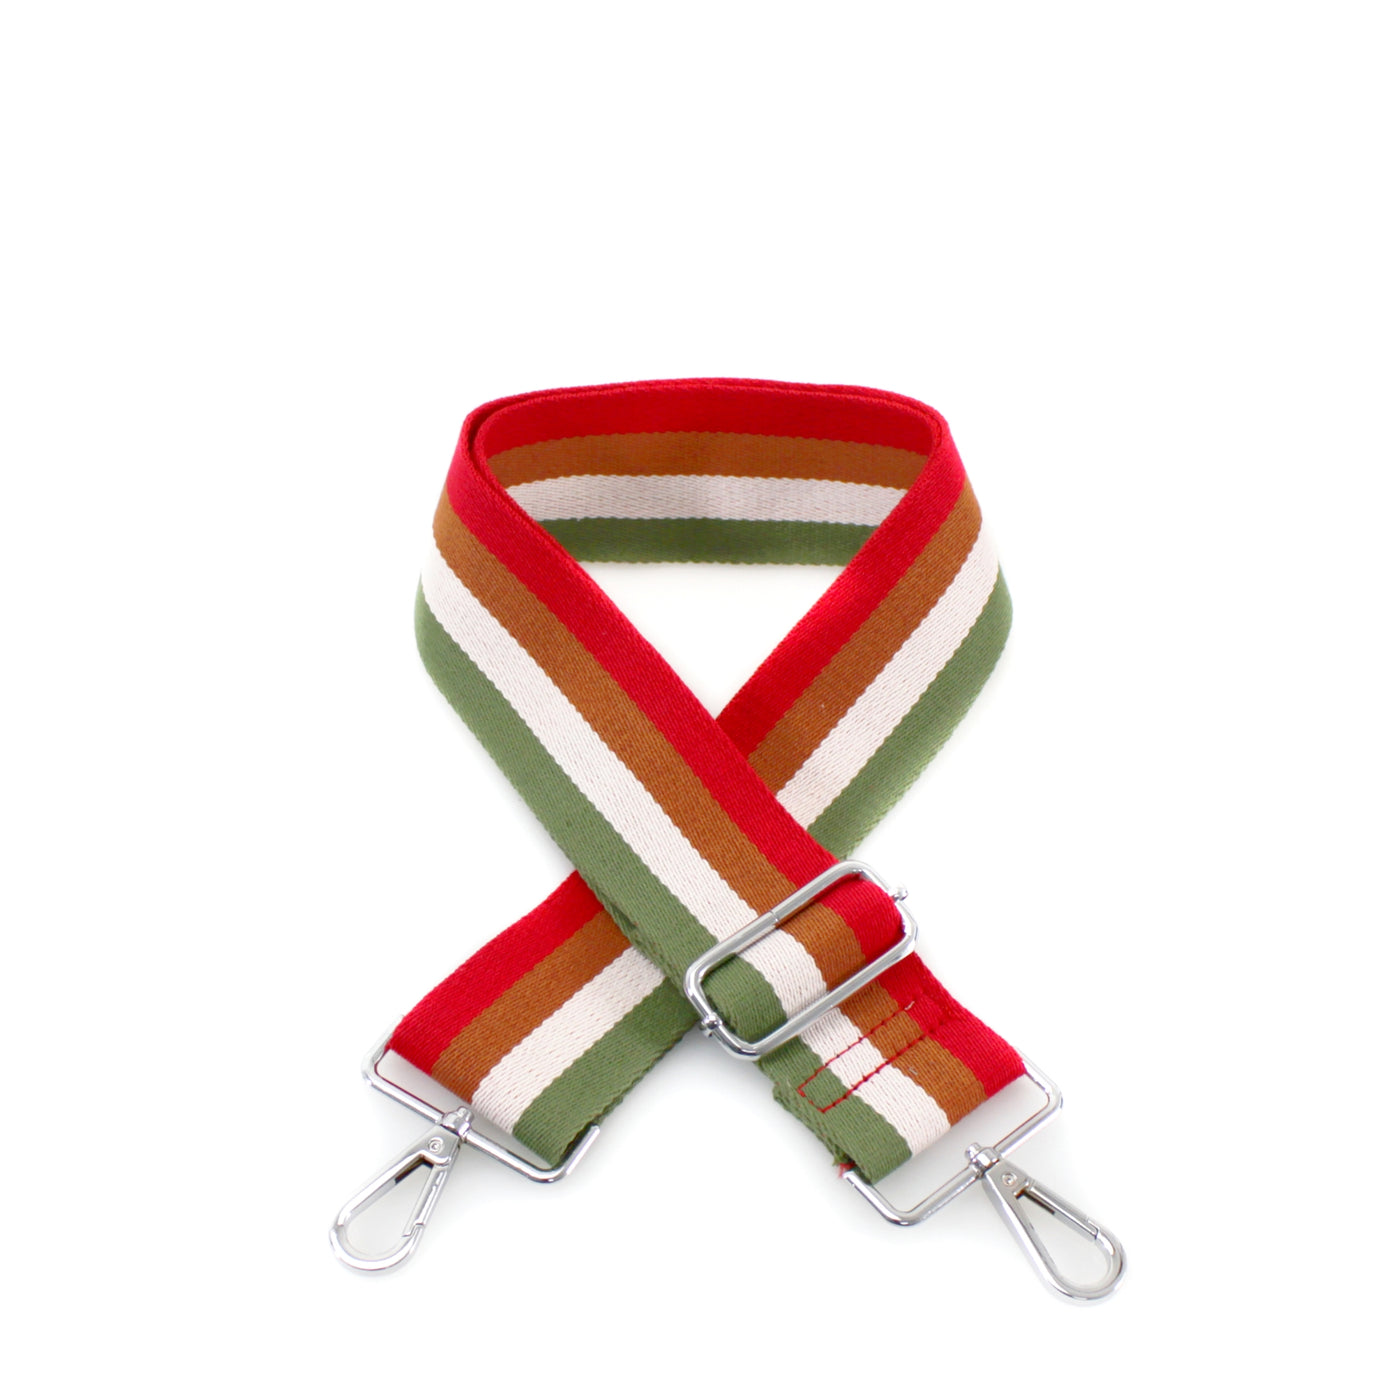 Red & Green Stripes Print Bag Strap - Silver Fittings